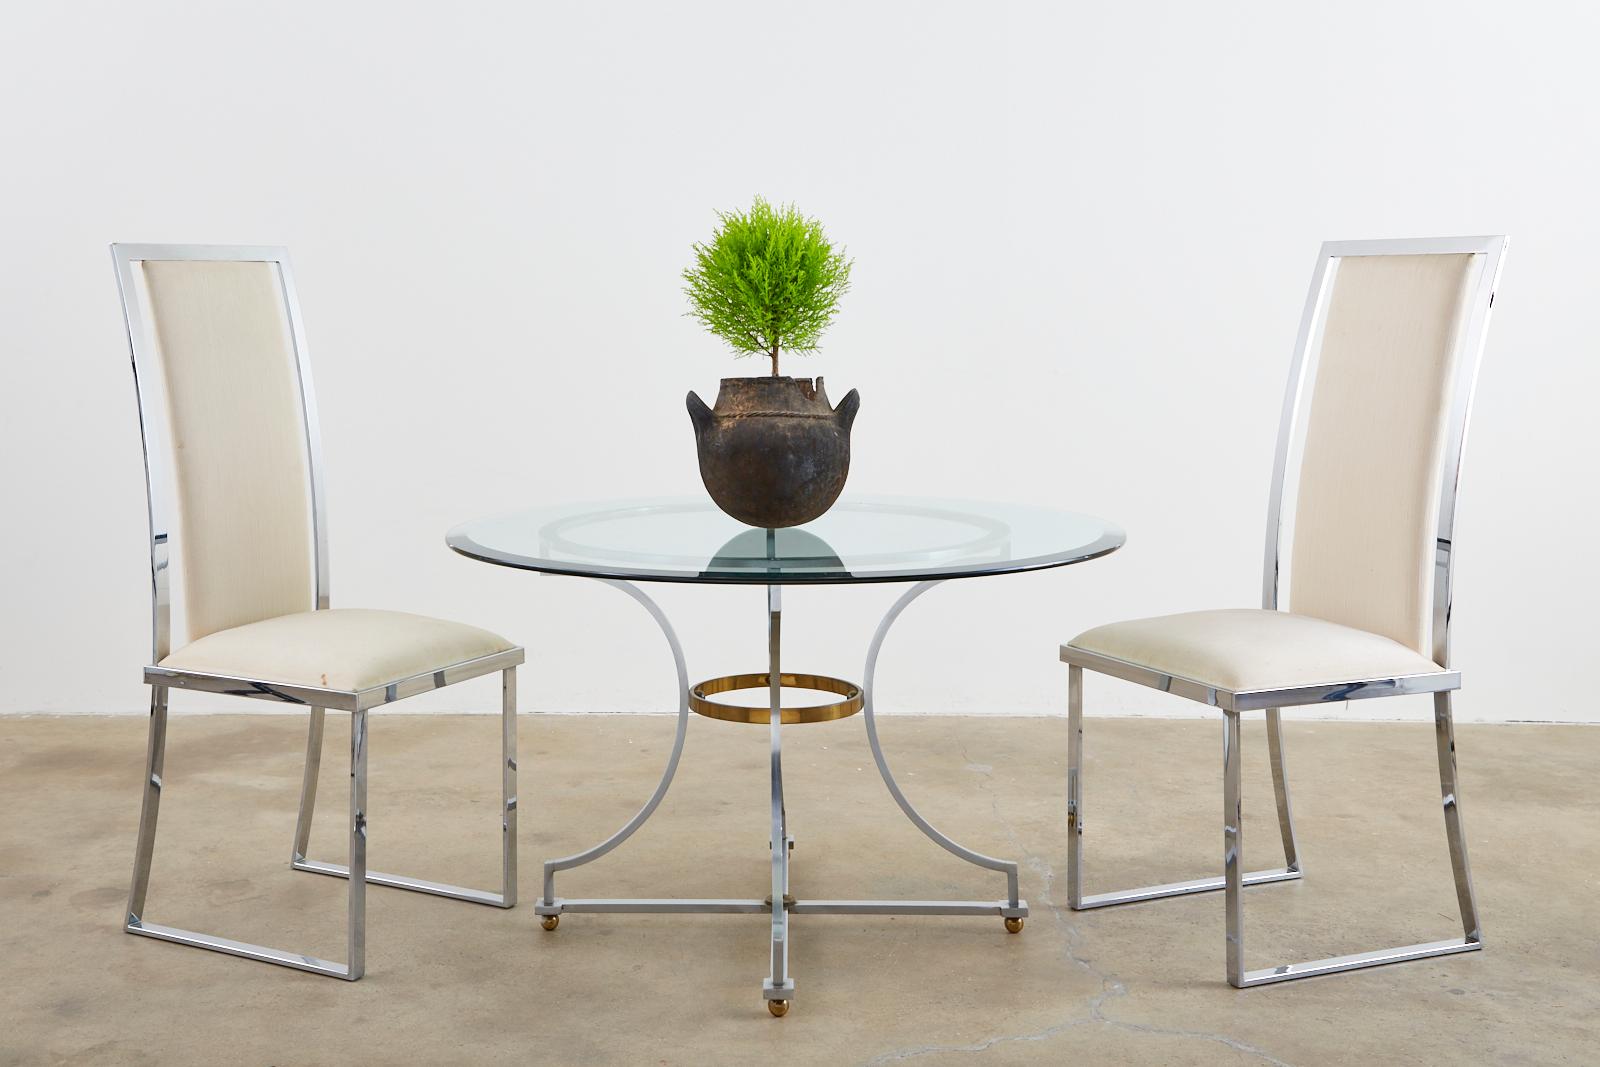 Rare set of six chrome dining chairs designed by Pierre Cardin. Featuring a Milo Baughman inspired flat bar style frame. Exceptional design having a seat that wraps around the tall backrest that becomes the legs. Sculptural style that has a